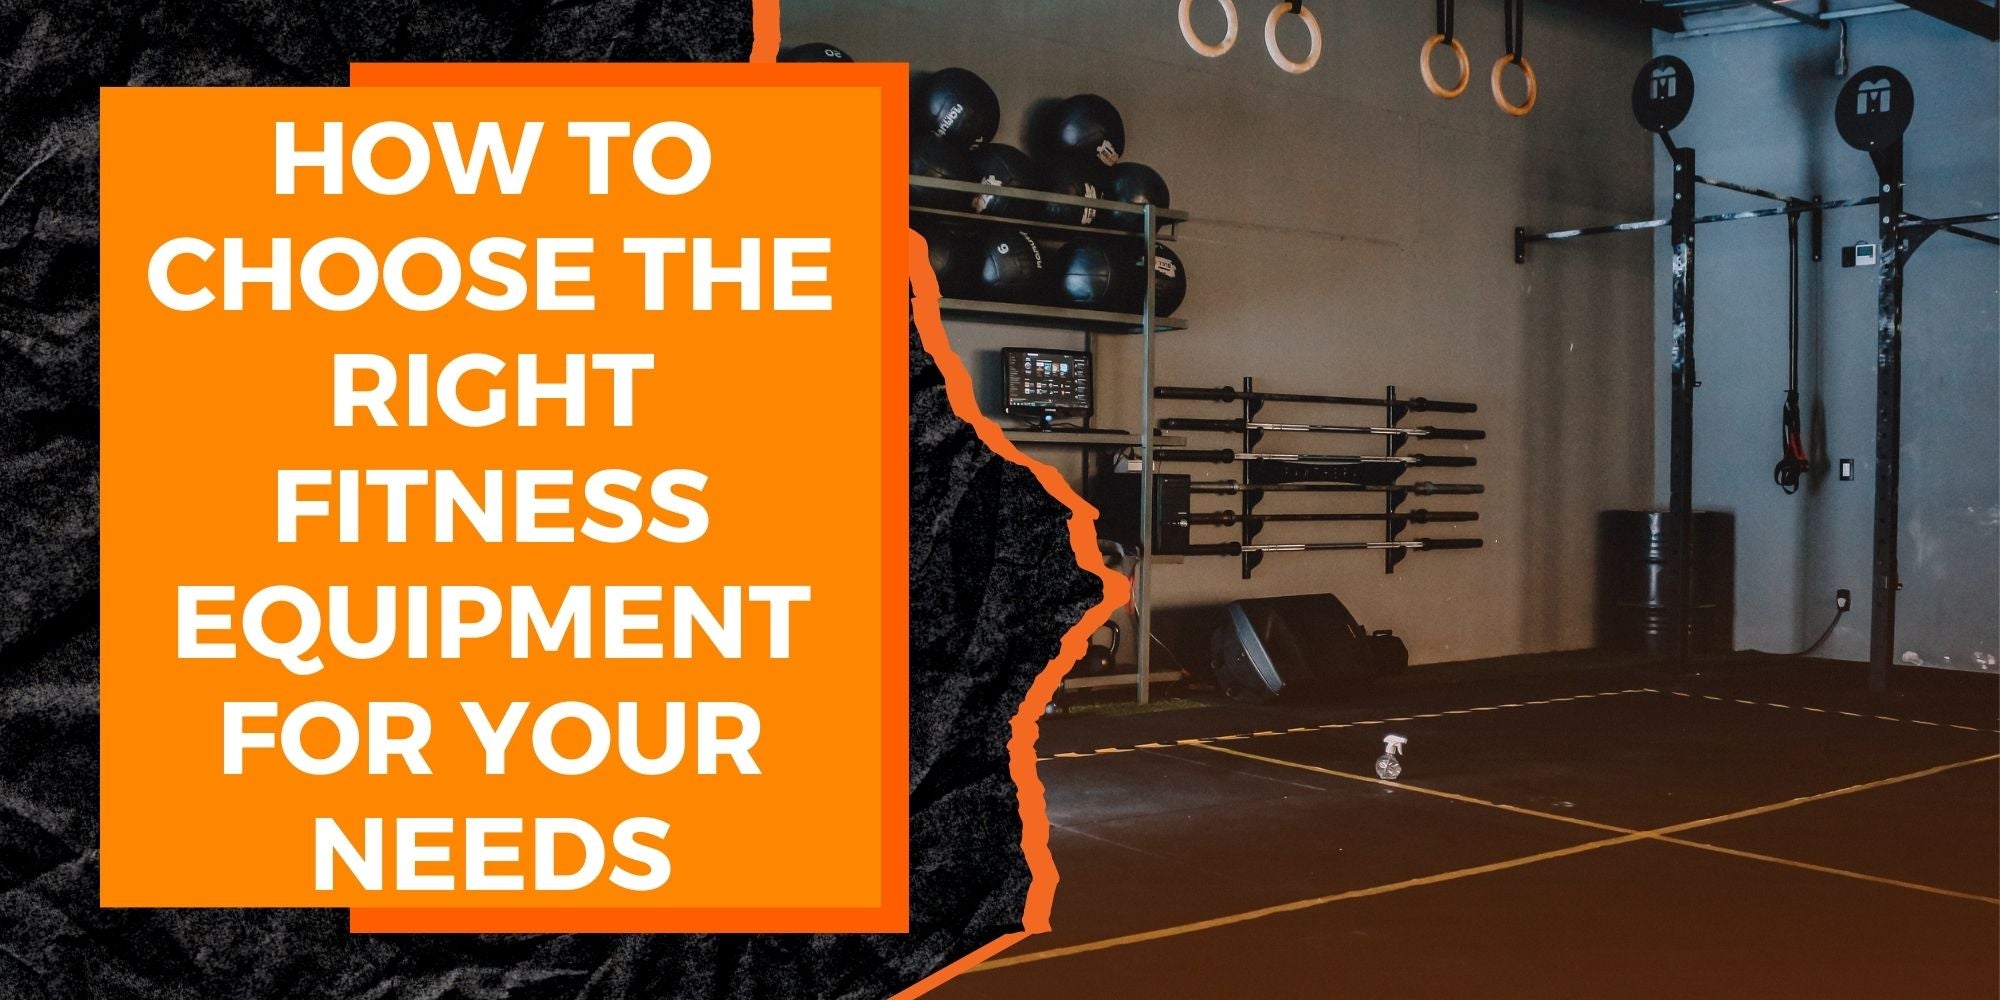 How to Choose the Right Fitness Equipment for Your Needs